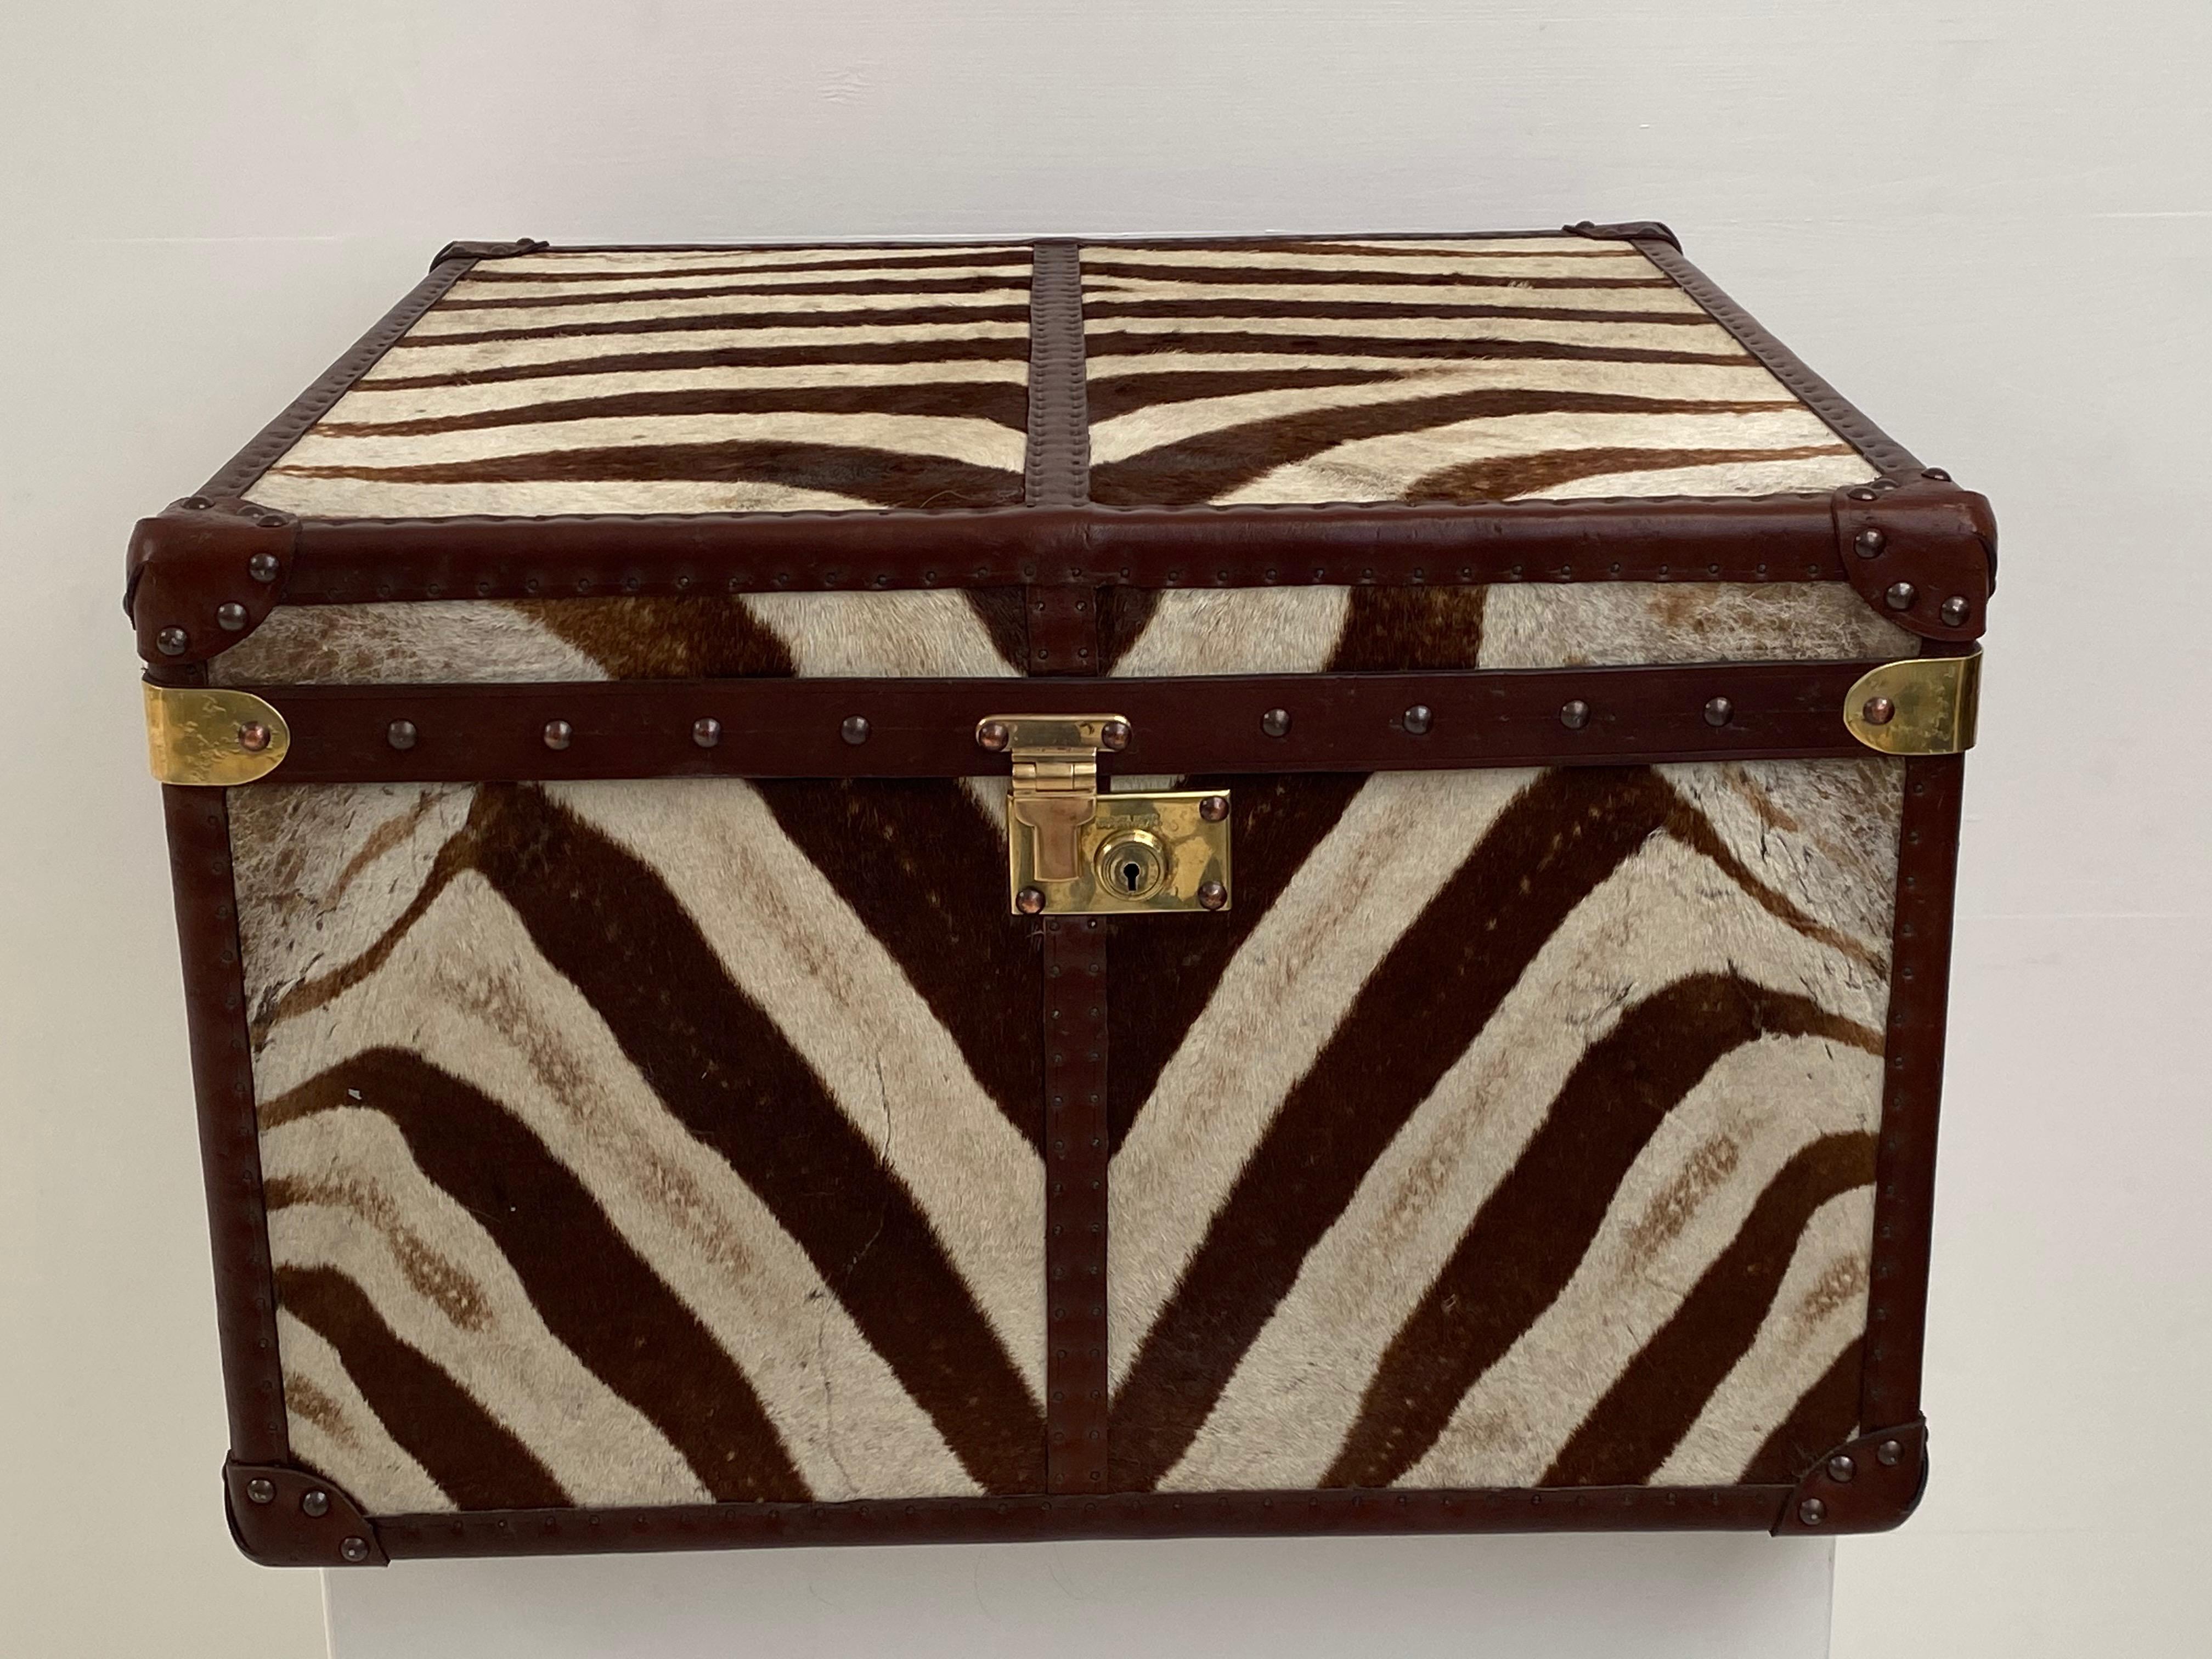 Beautiful antique English brown leather trunk with front and top covered with zebra skin,
nice leather handles and brass corners and lock.